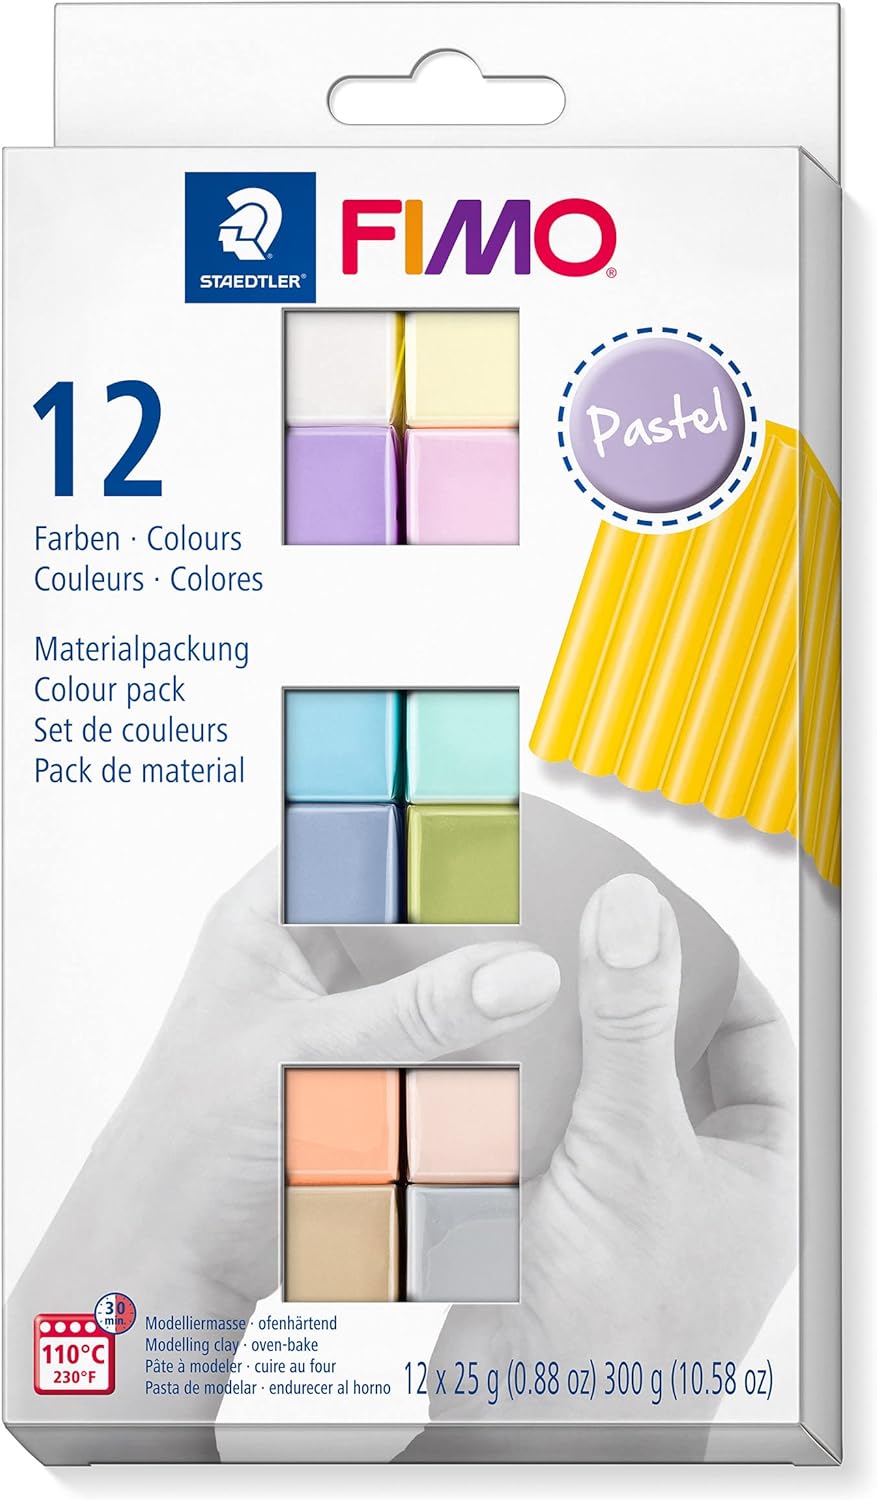 STAEDTLER 8023 C12-3 FIMO Soft Oven Hardening Modelling Clay 12 x 25 g Blocks - Pastel Colours